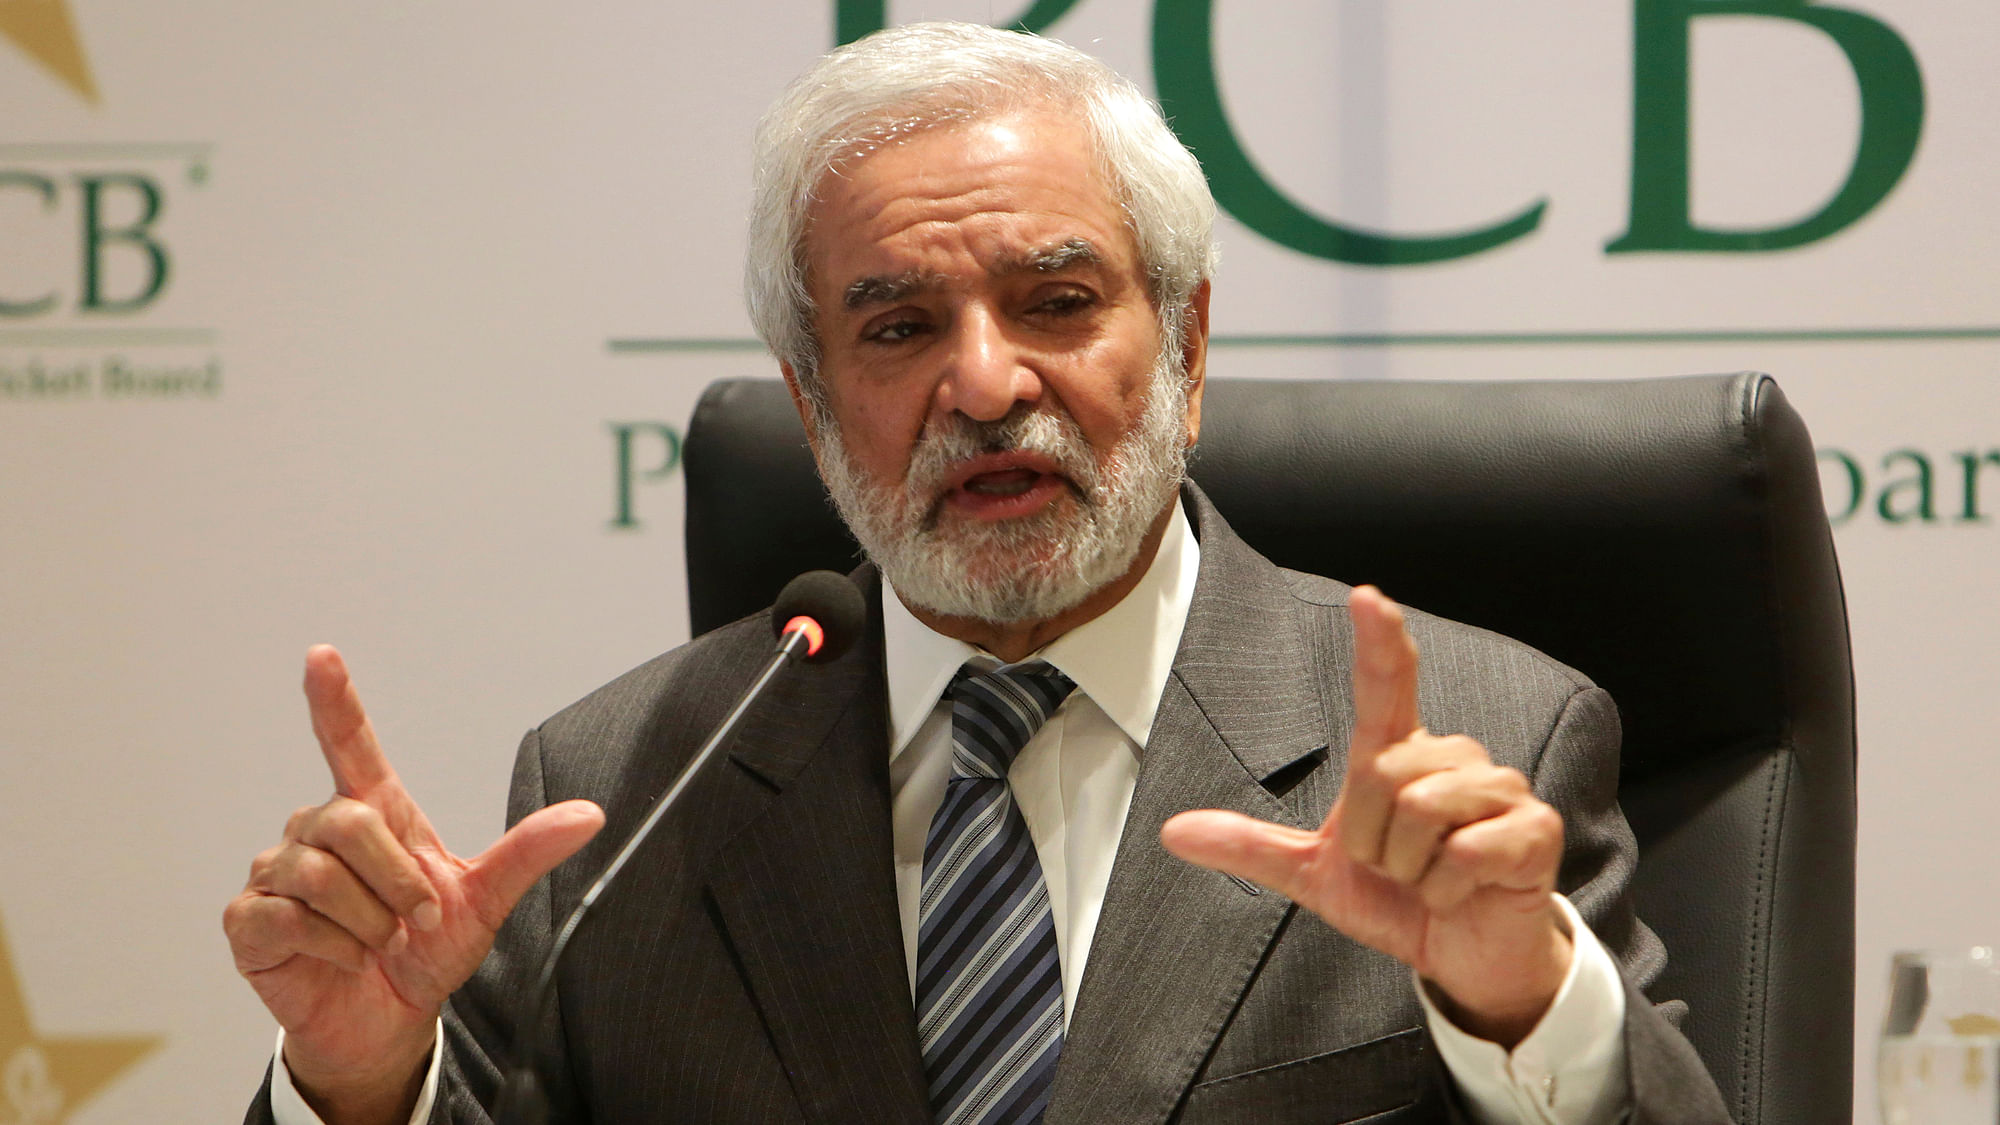 Chairman of Pakistan Cricket Board Ehsan Mani addresses a news conference in Lahore, Pakistan.